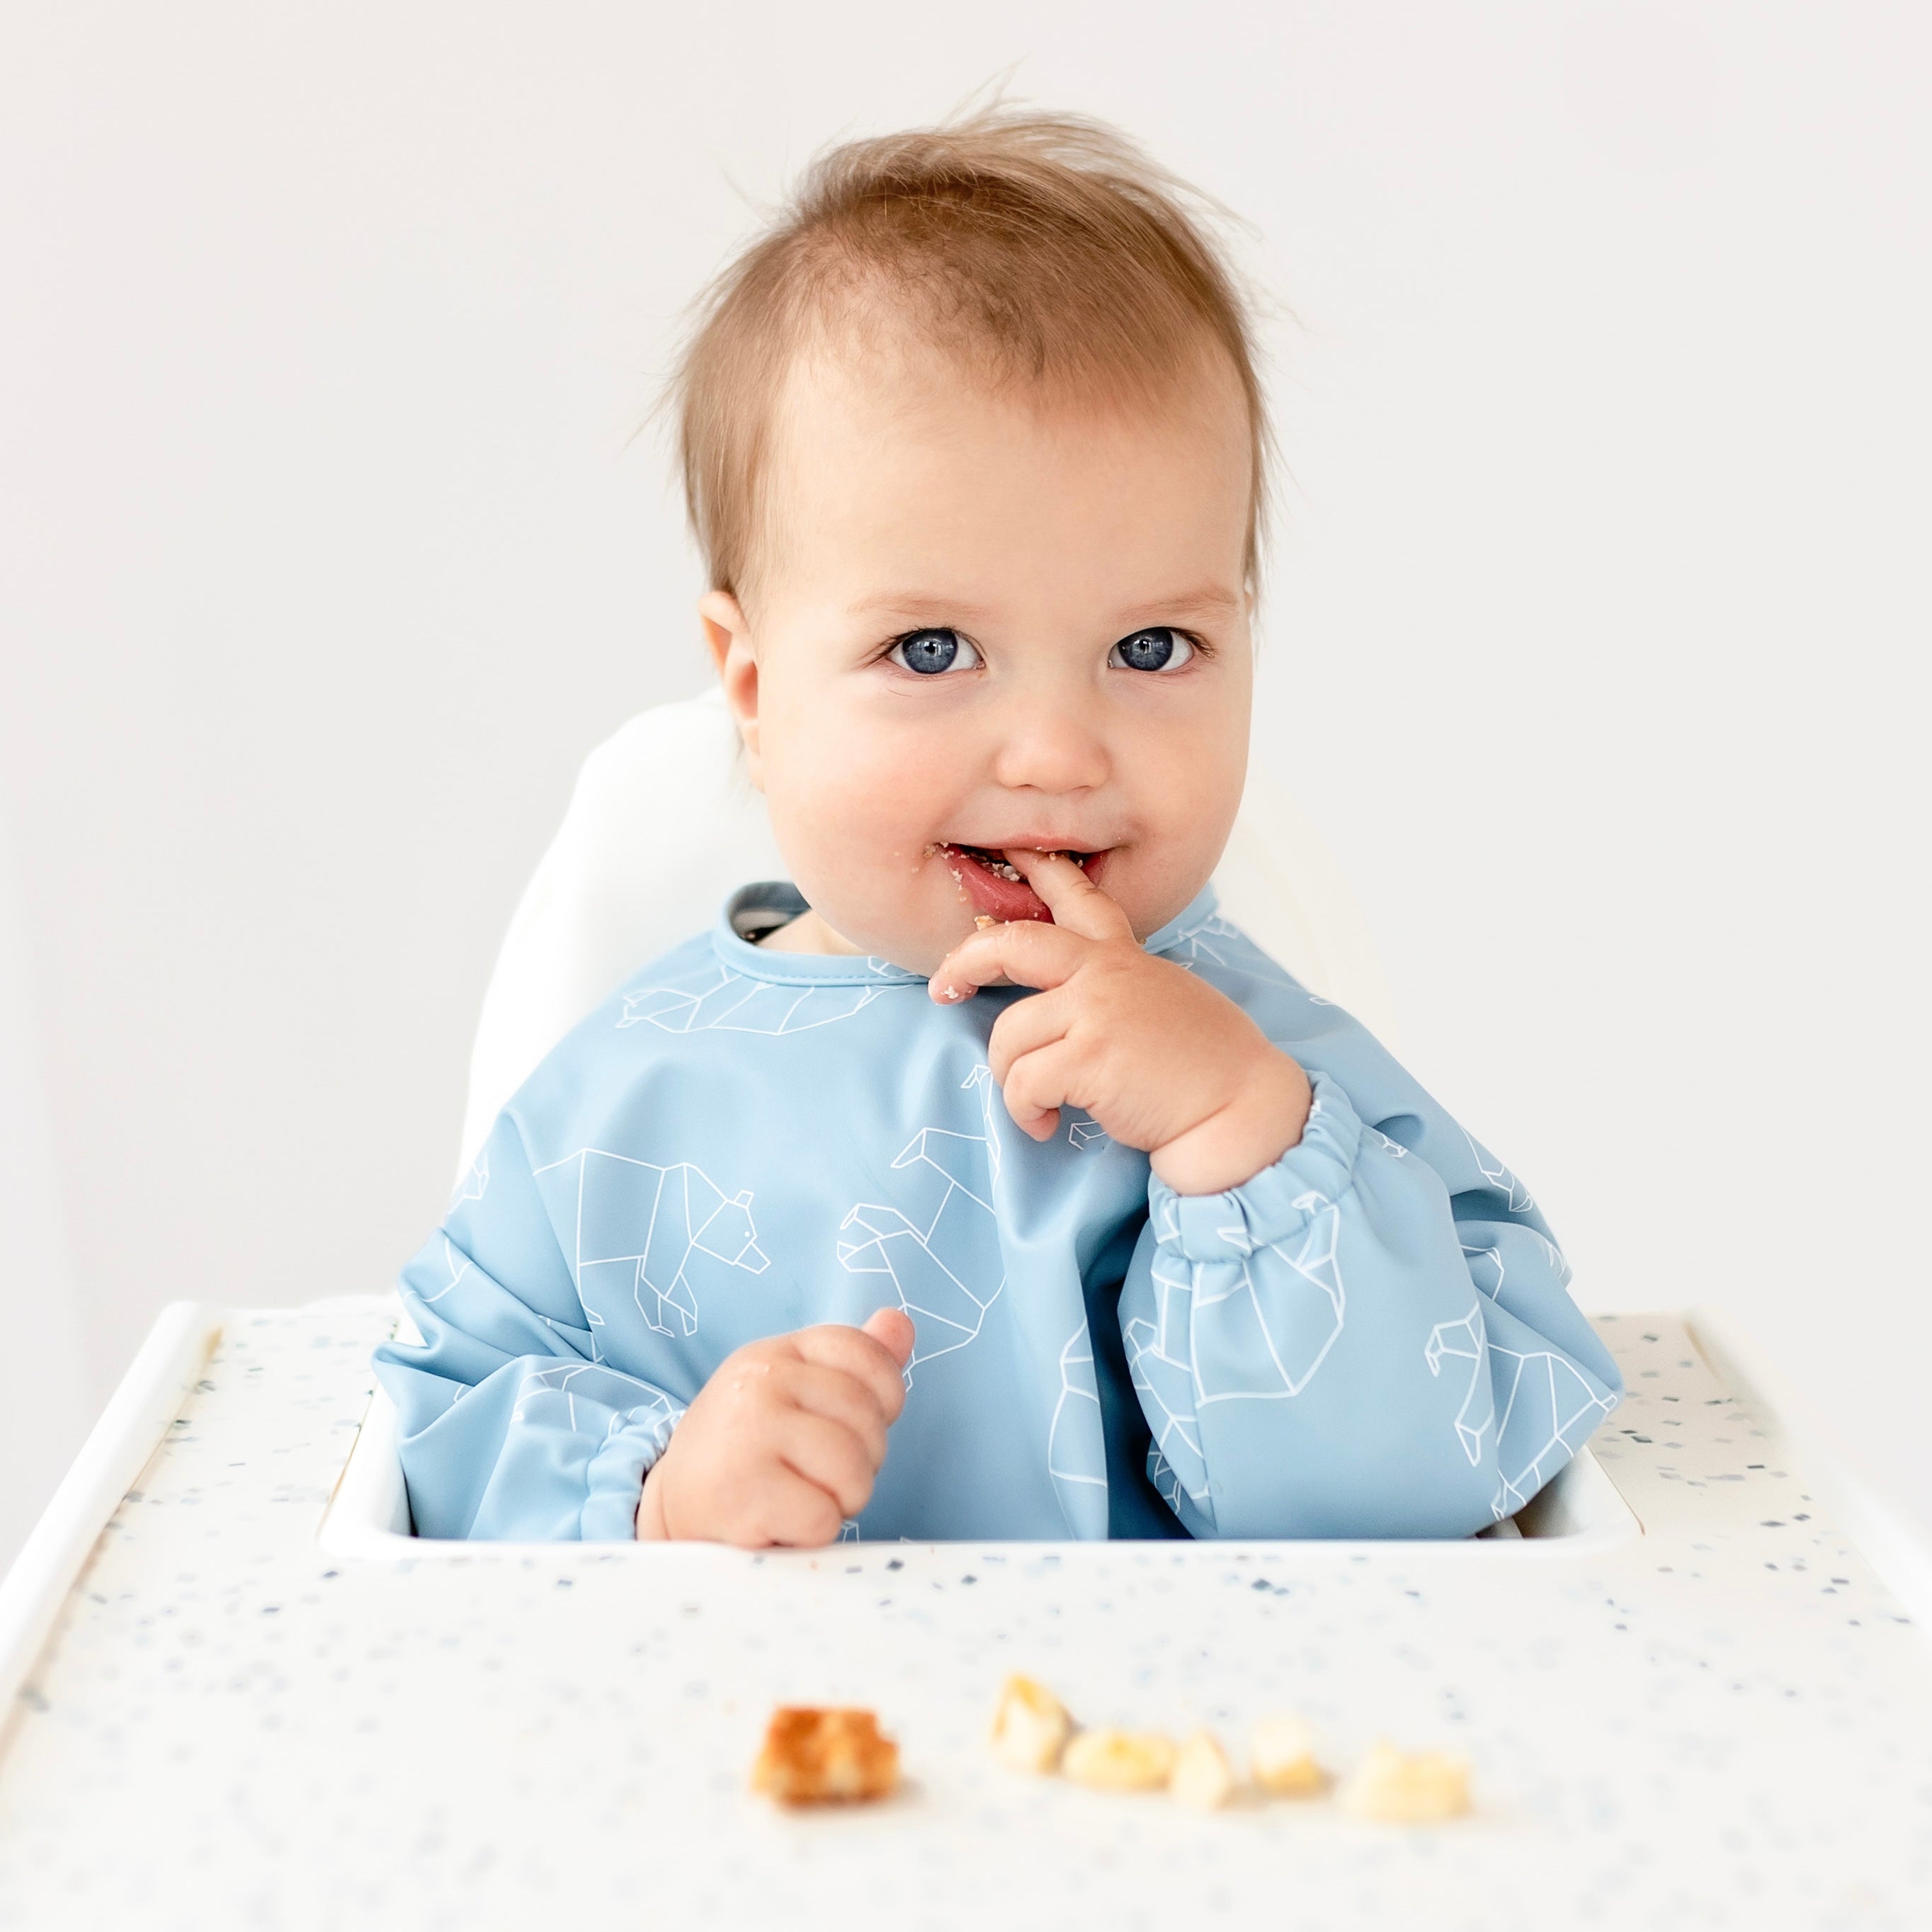 Baby eating in high chair